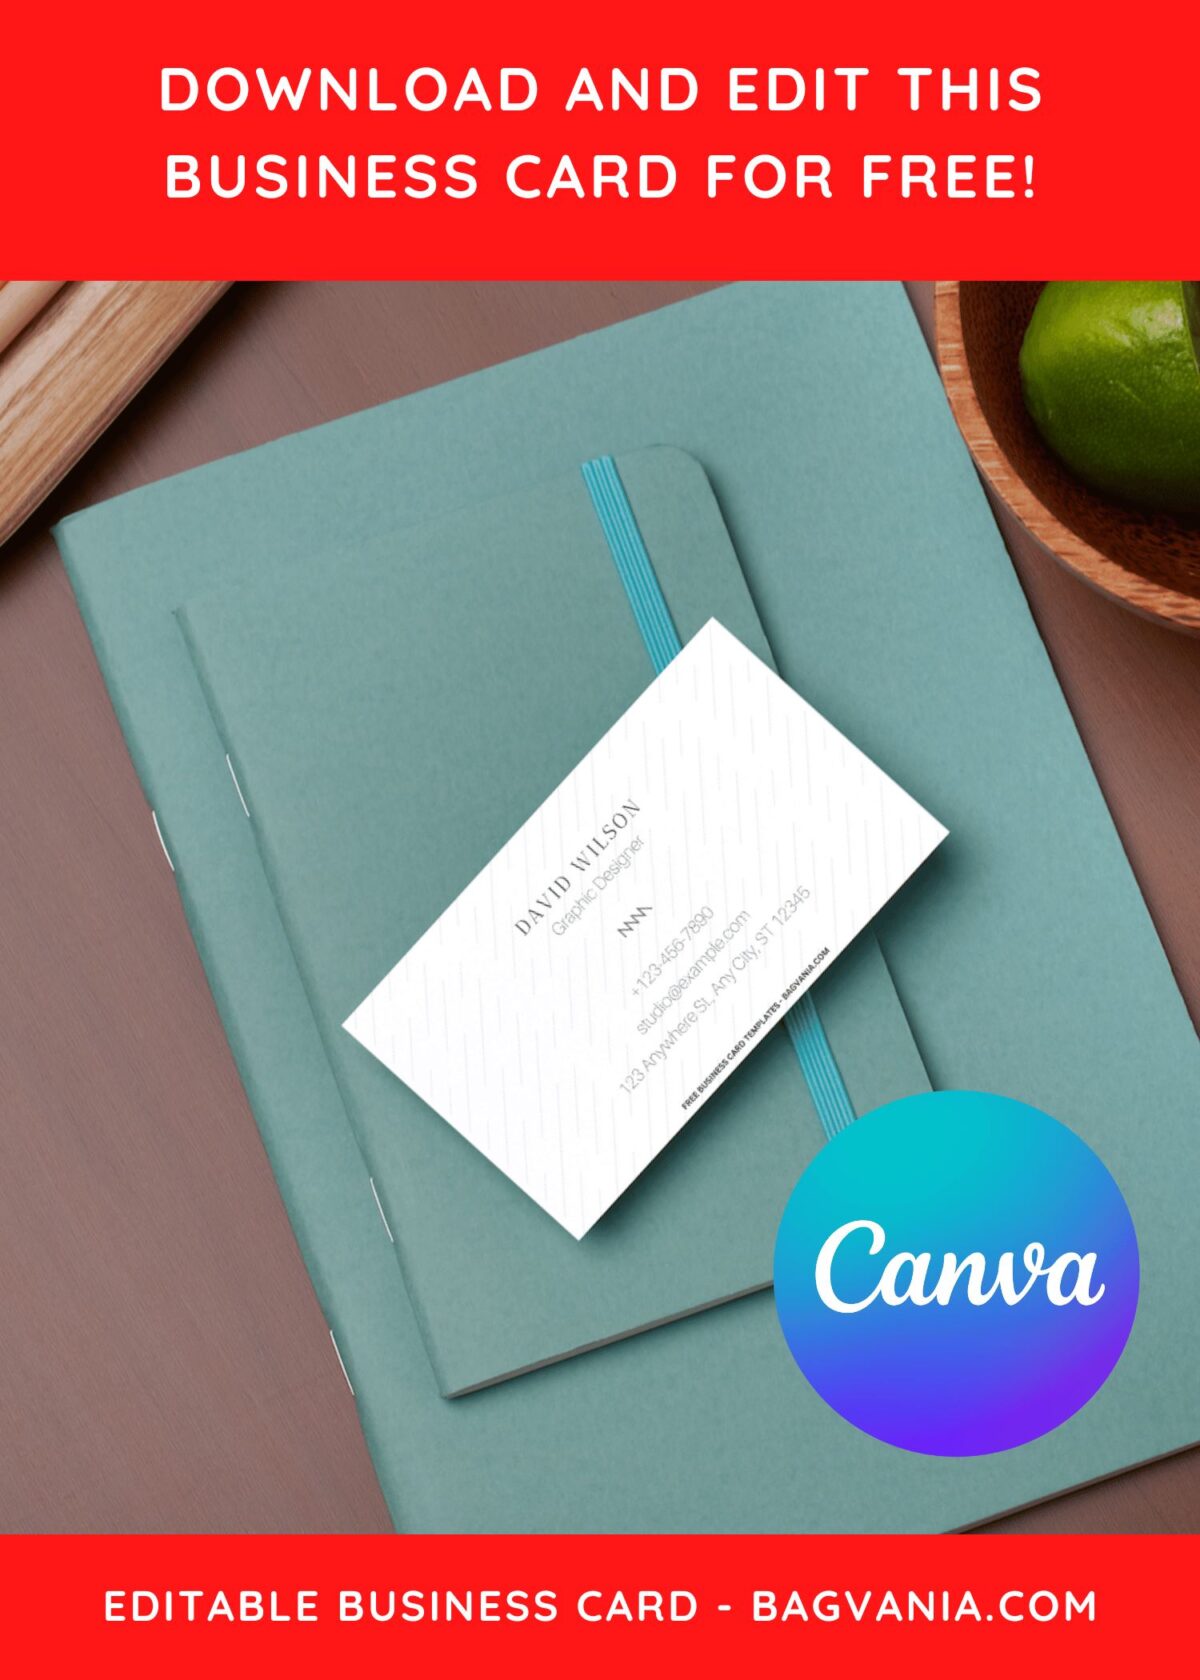 10+ Edgy Canva Business Card Templates B